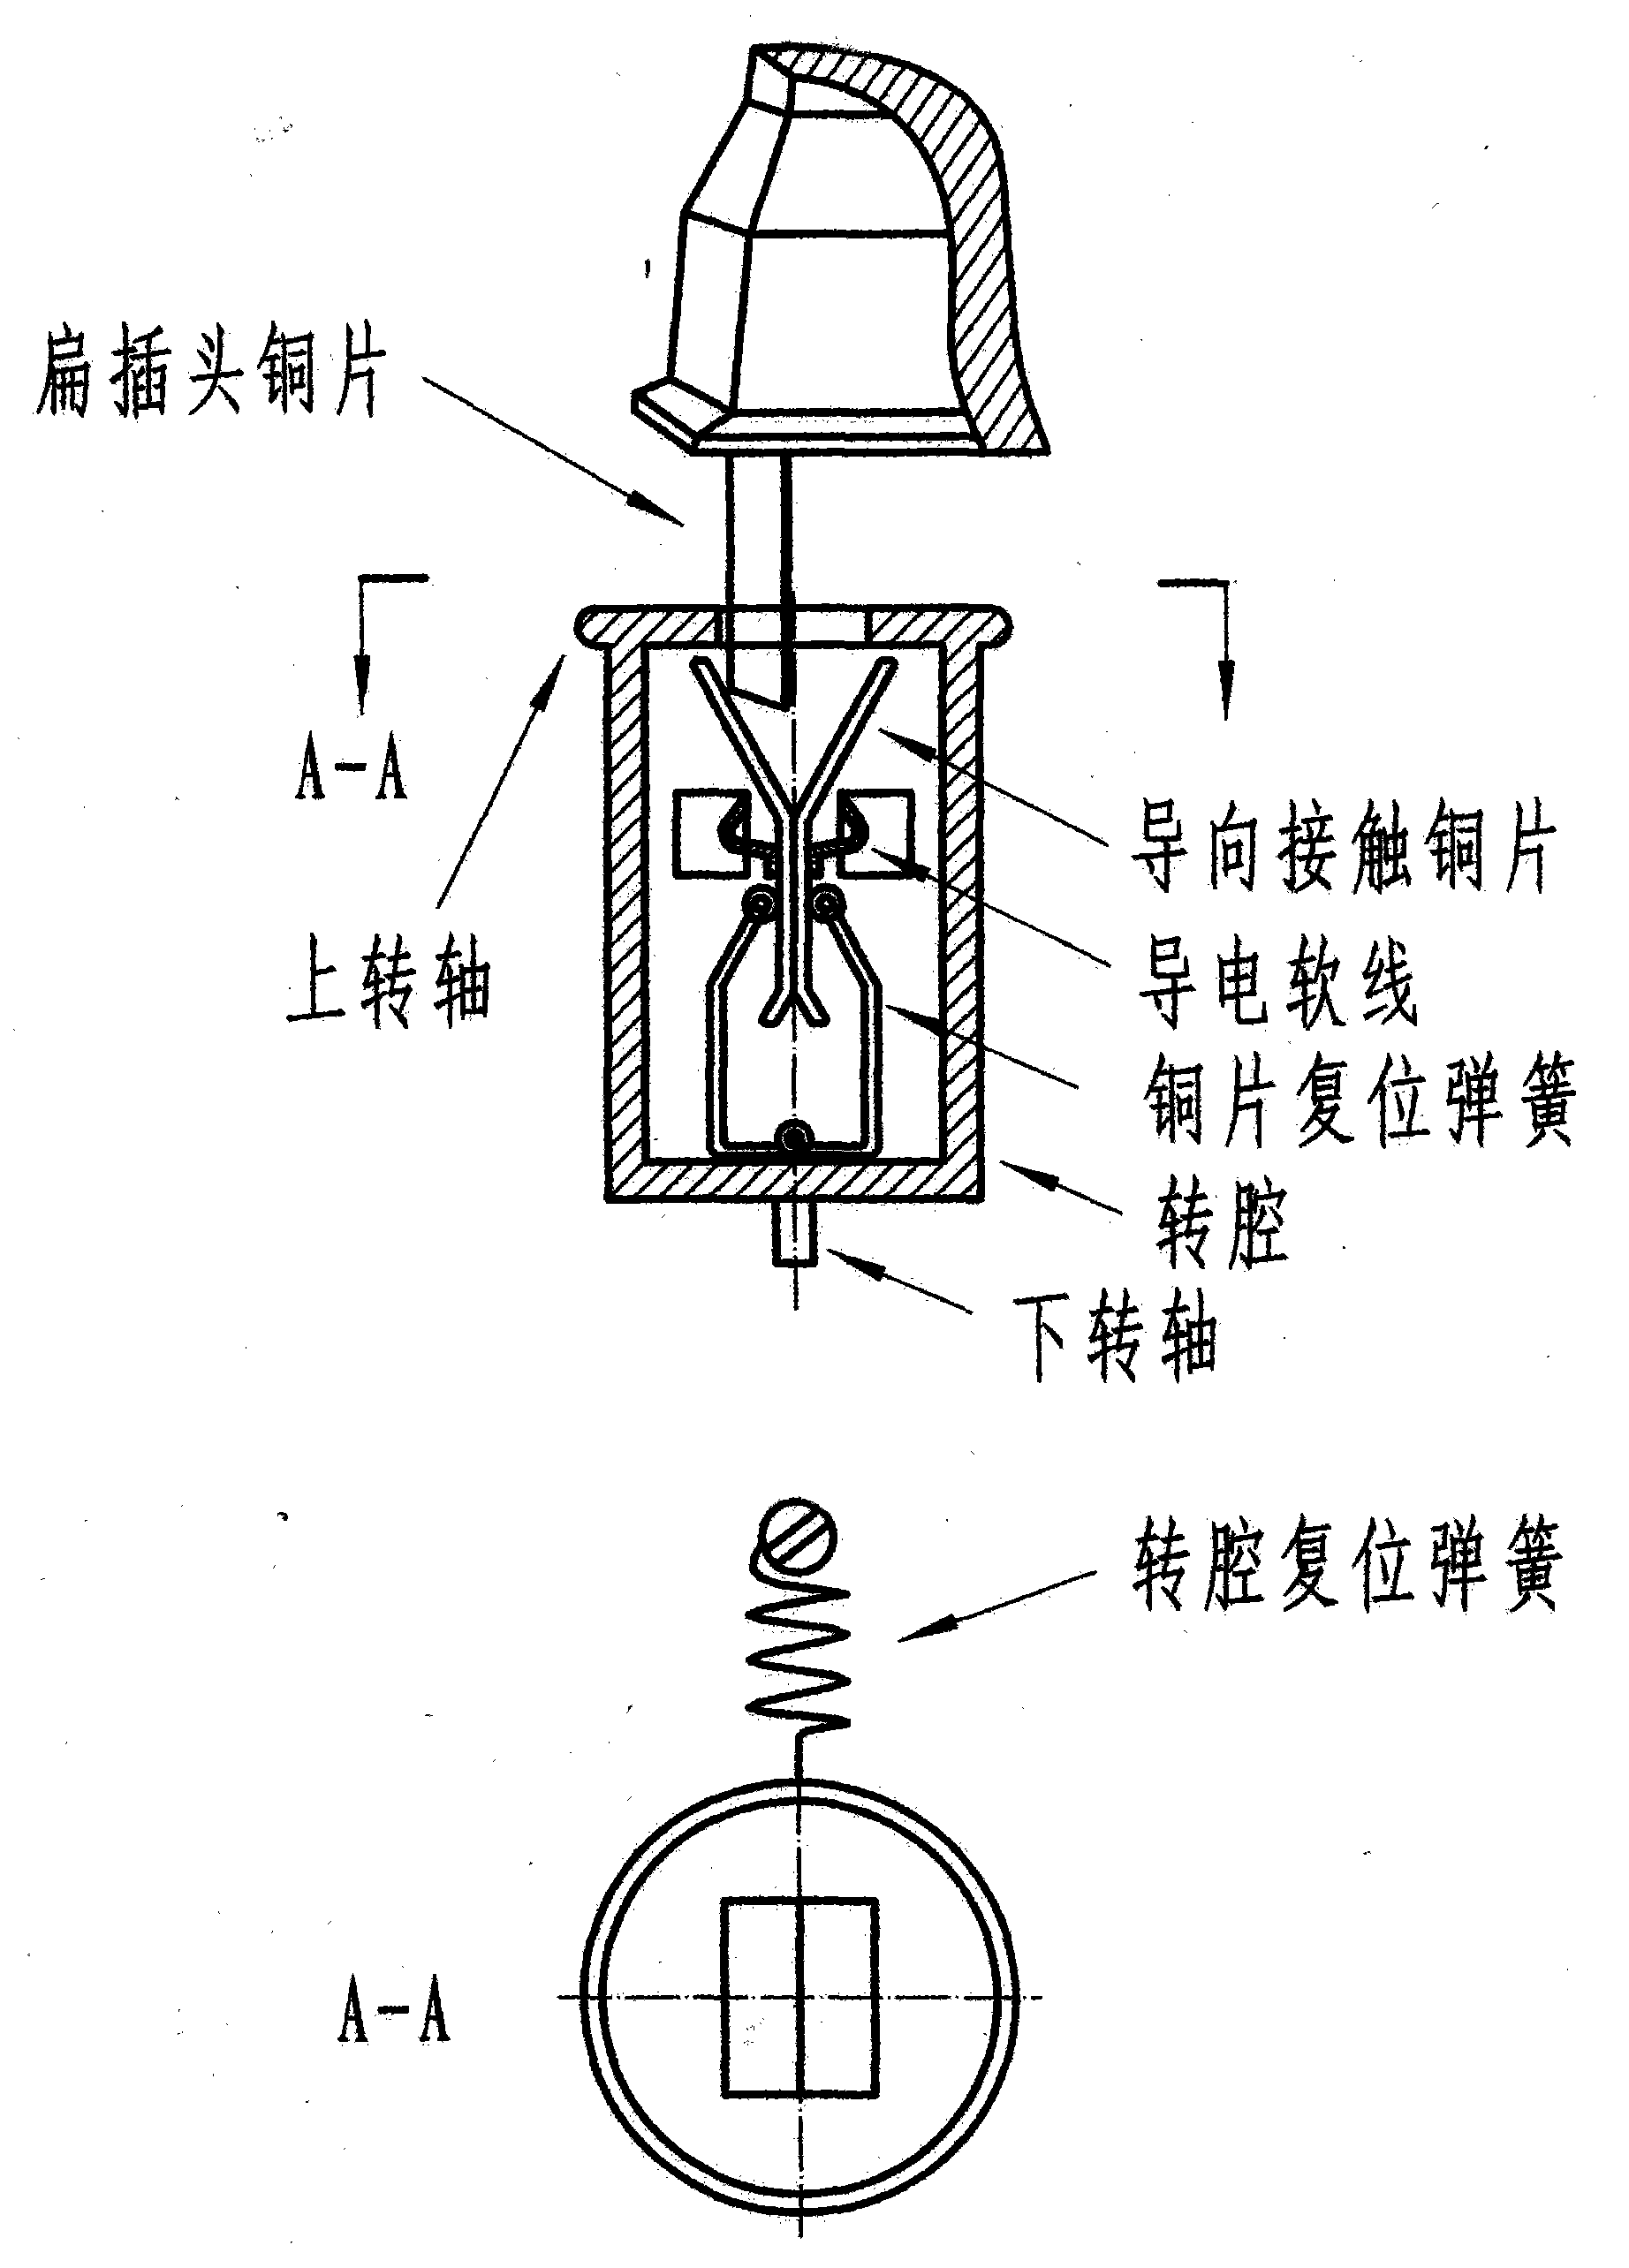 Power socket with automatic-rotating contact copper sheet